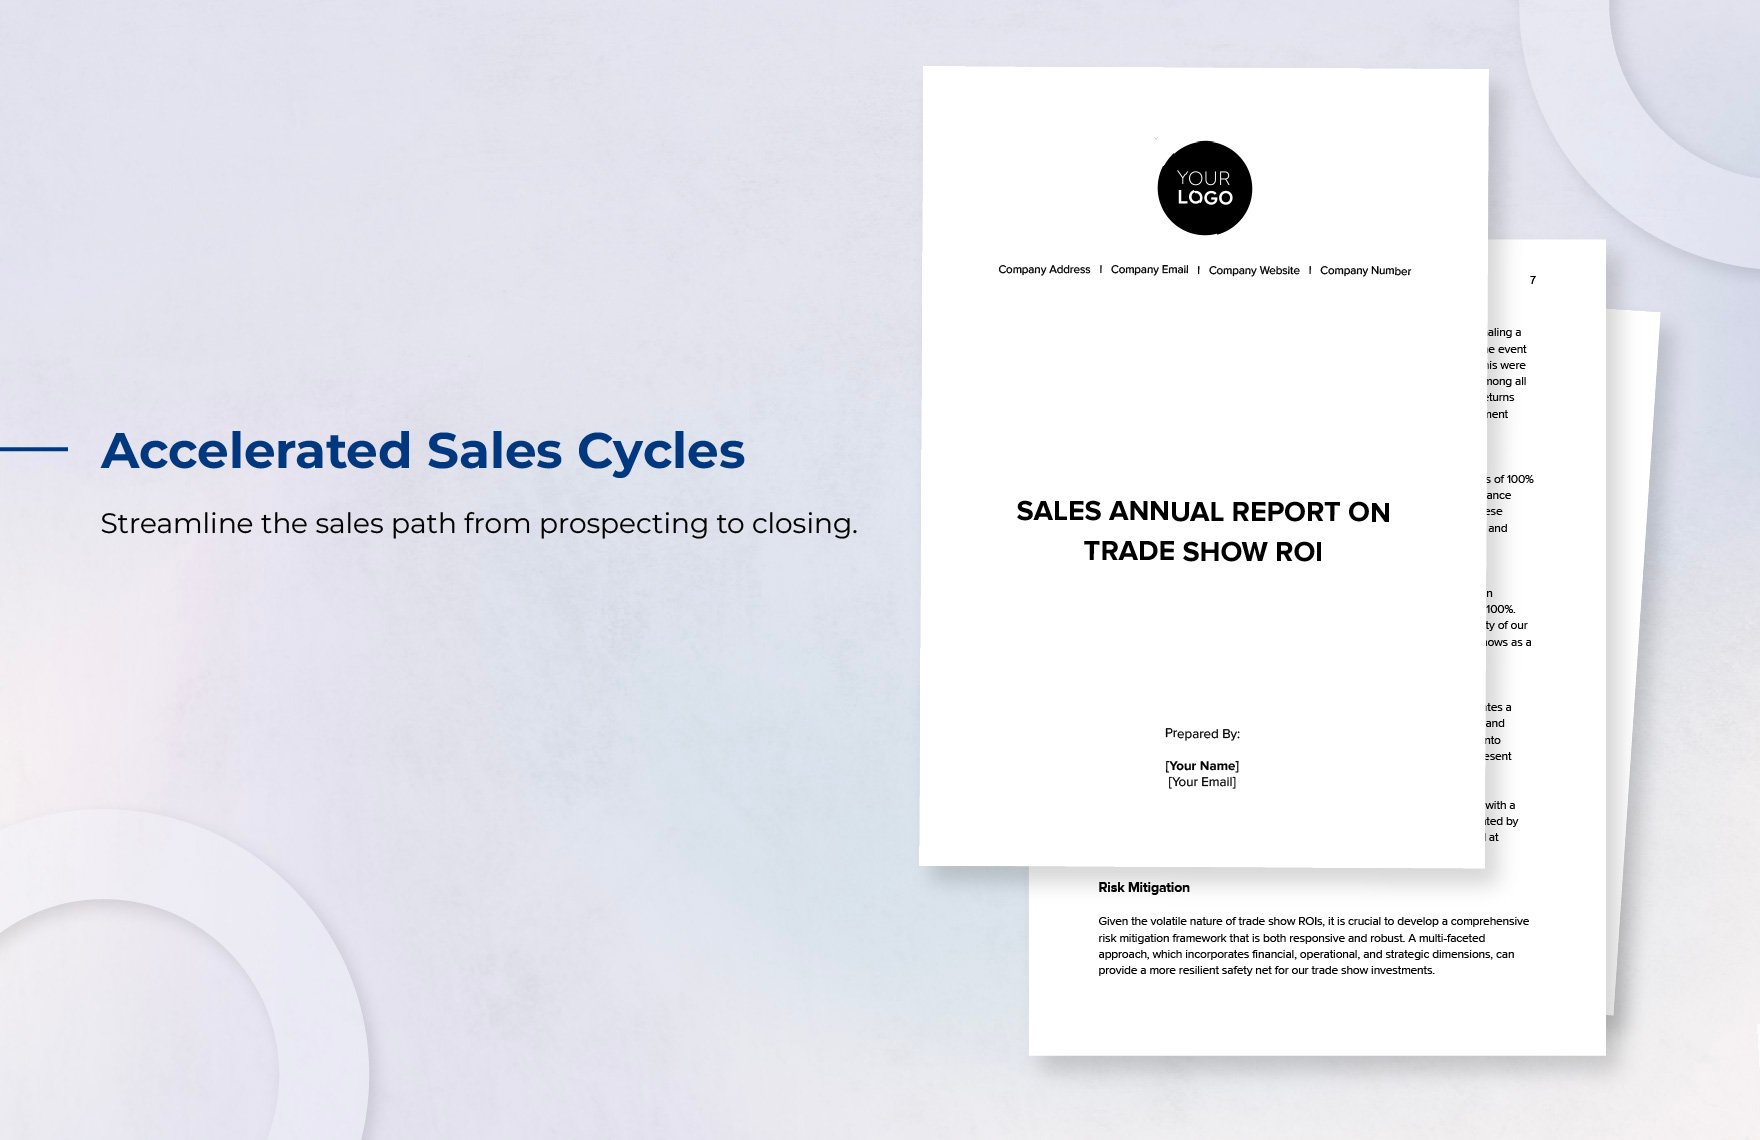 Sales Annual Report on Trade Show ROI Template